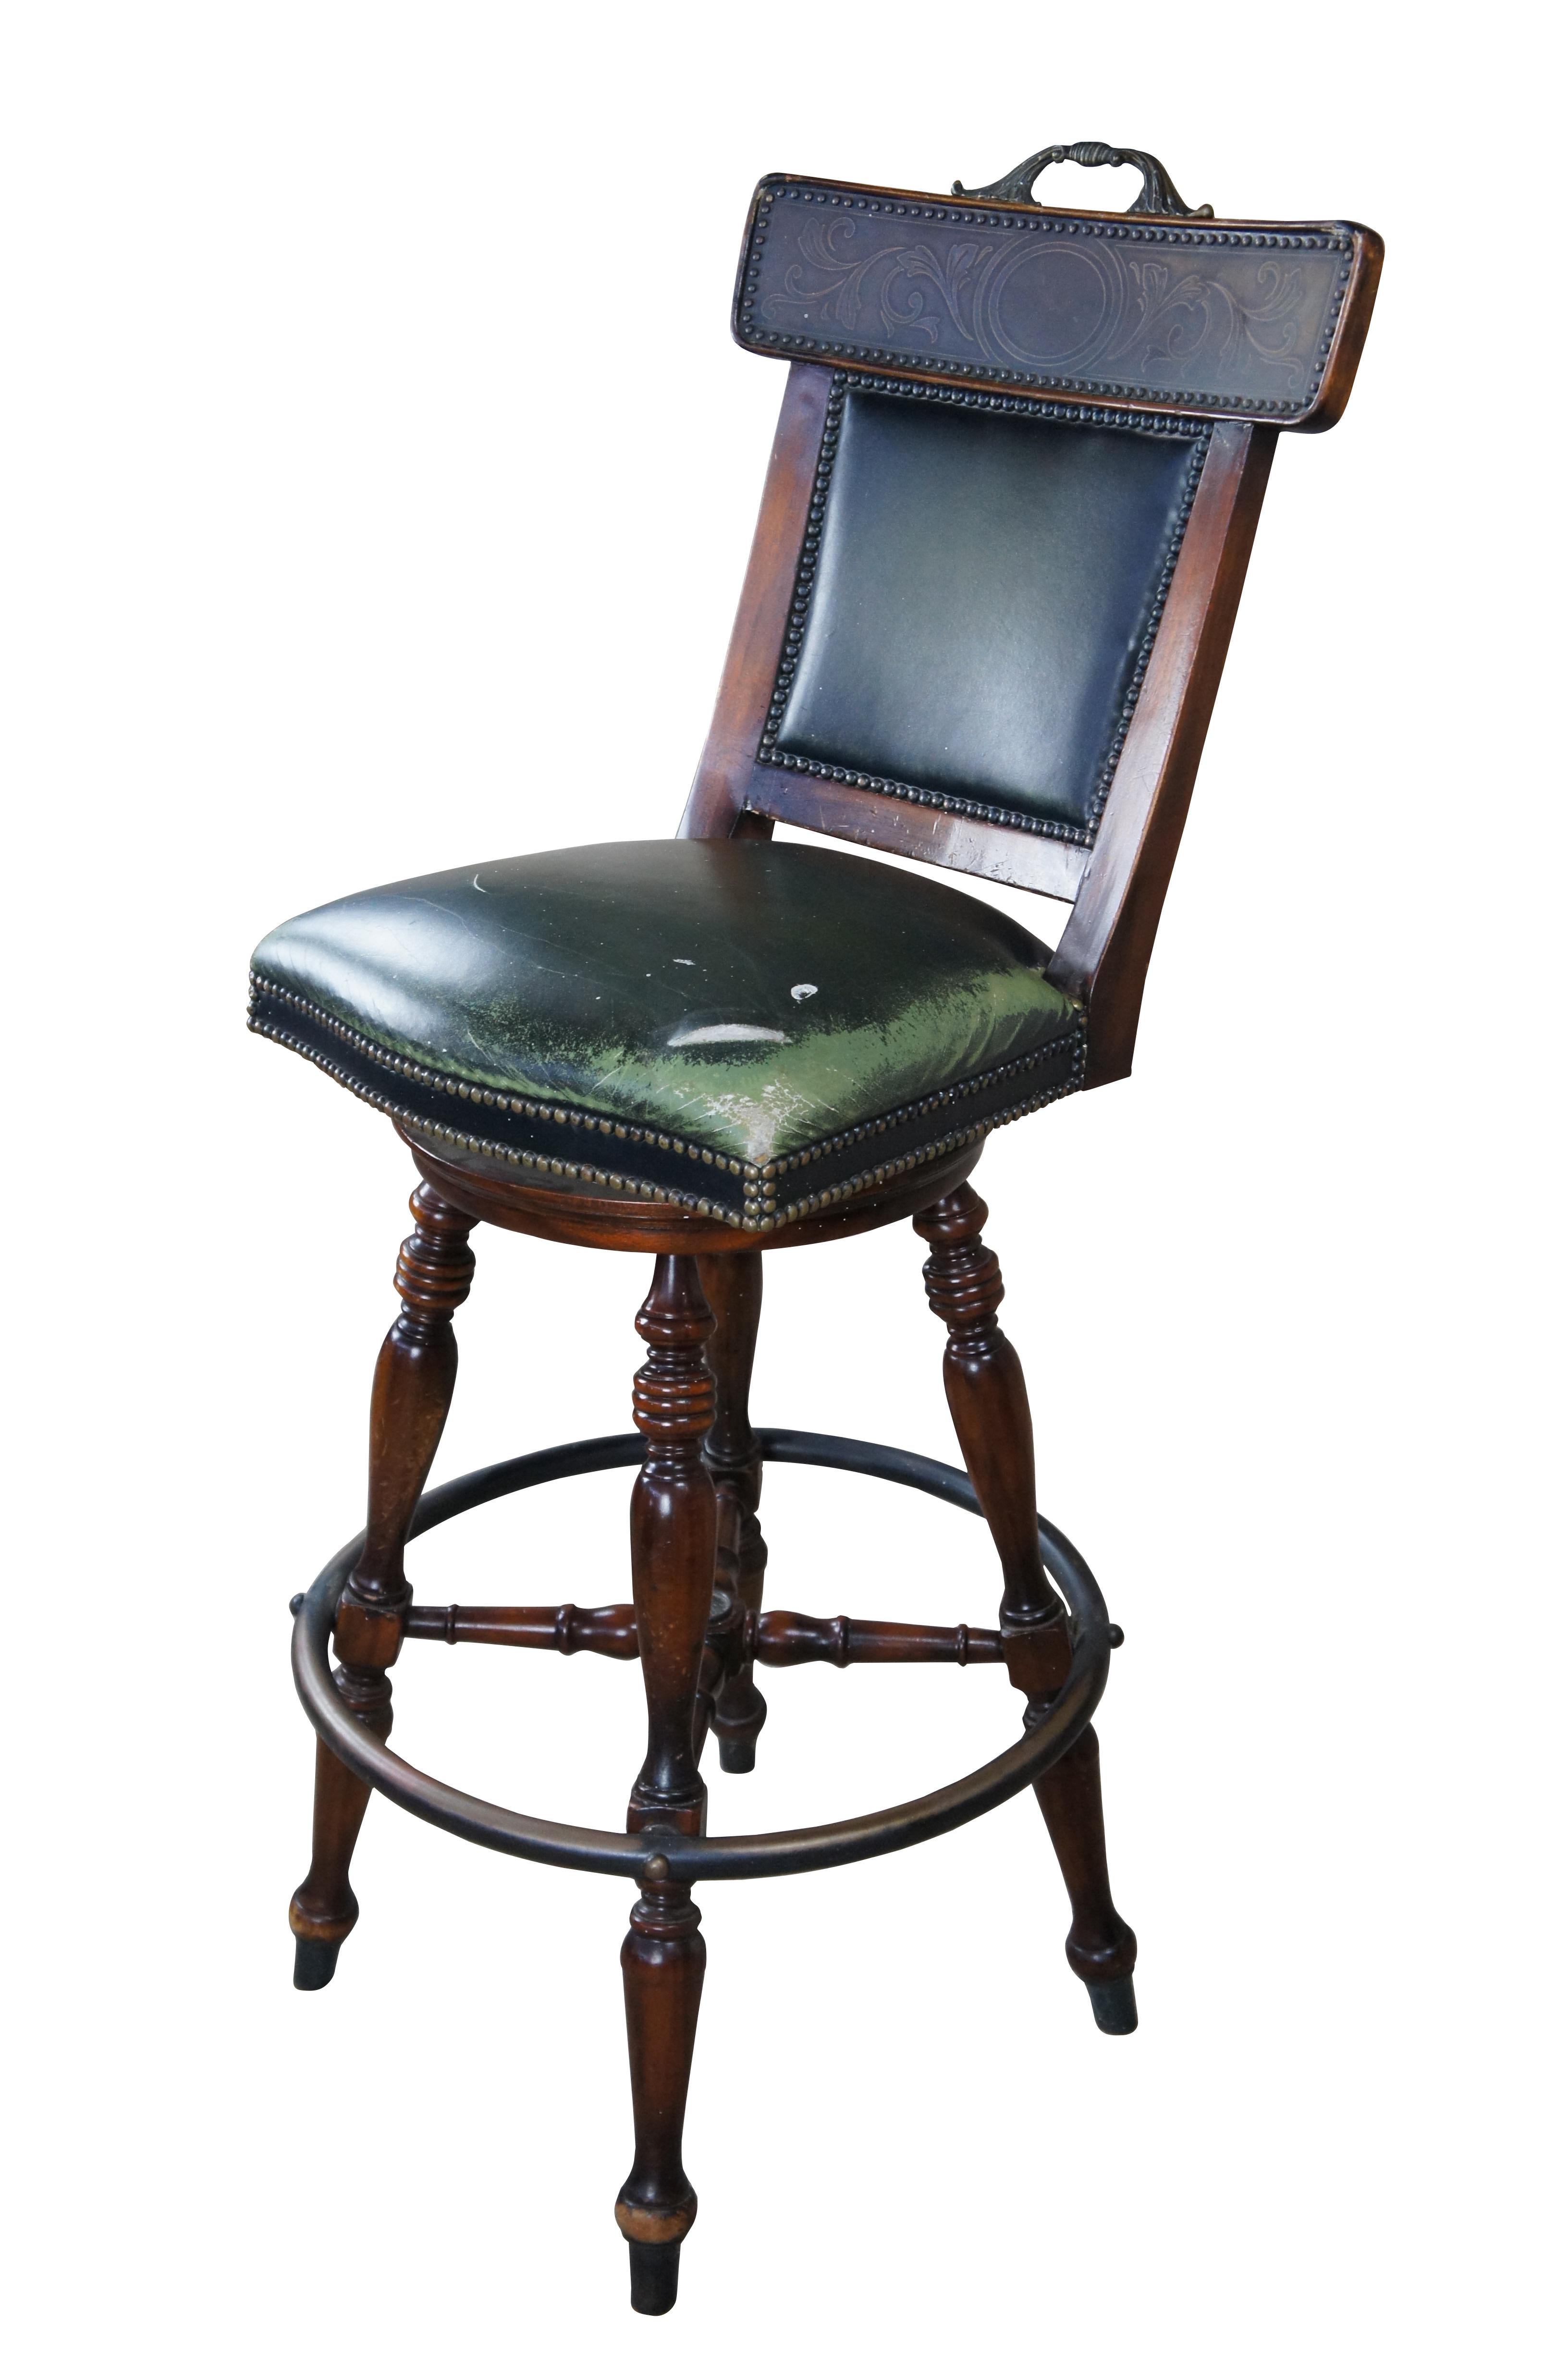 Vintage Theodore Alexander French inspired green leather swivel bar stool.  Features a mahogany frame with embossed brass crest rail over padded back and seat.  Features brass neailhead trim, turned legs and foot rest.  

Dimensions:
21.5